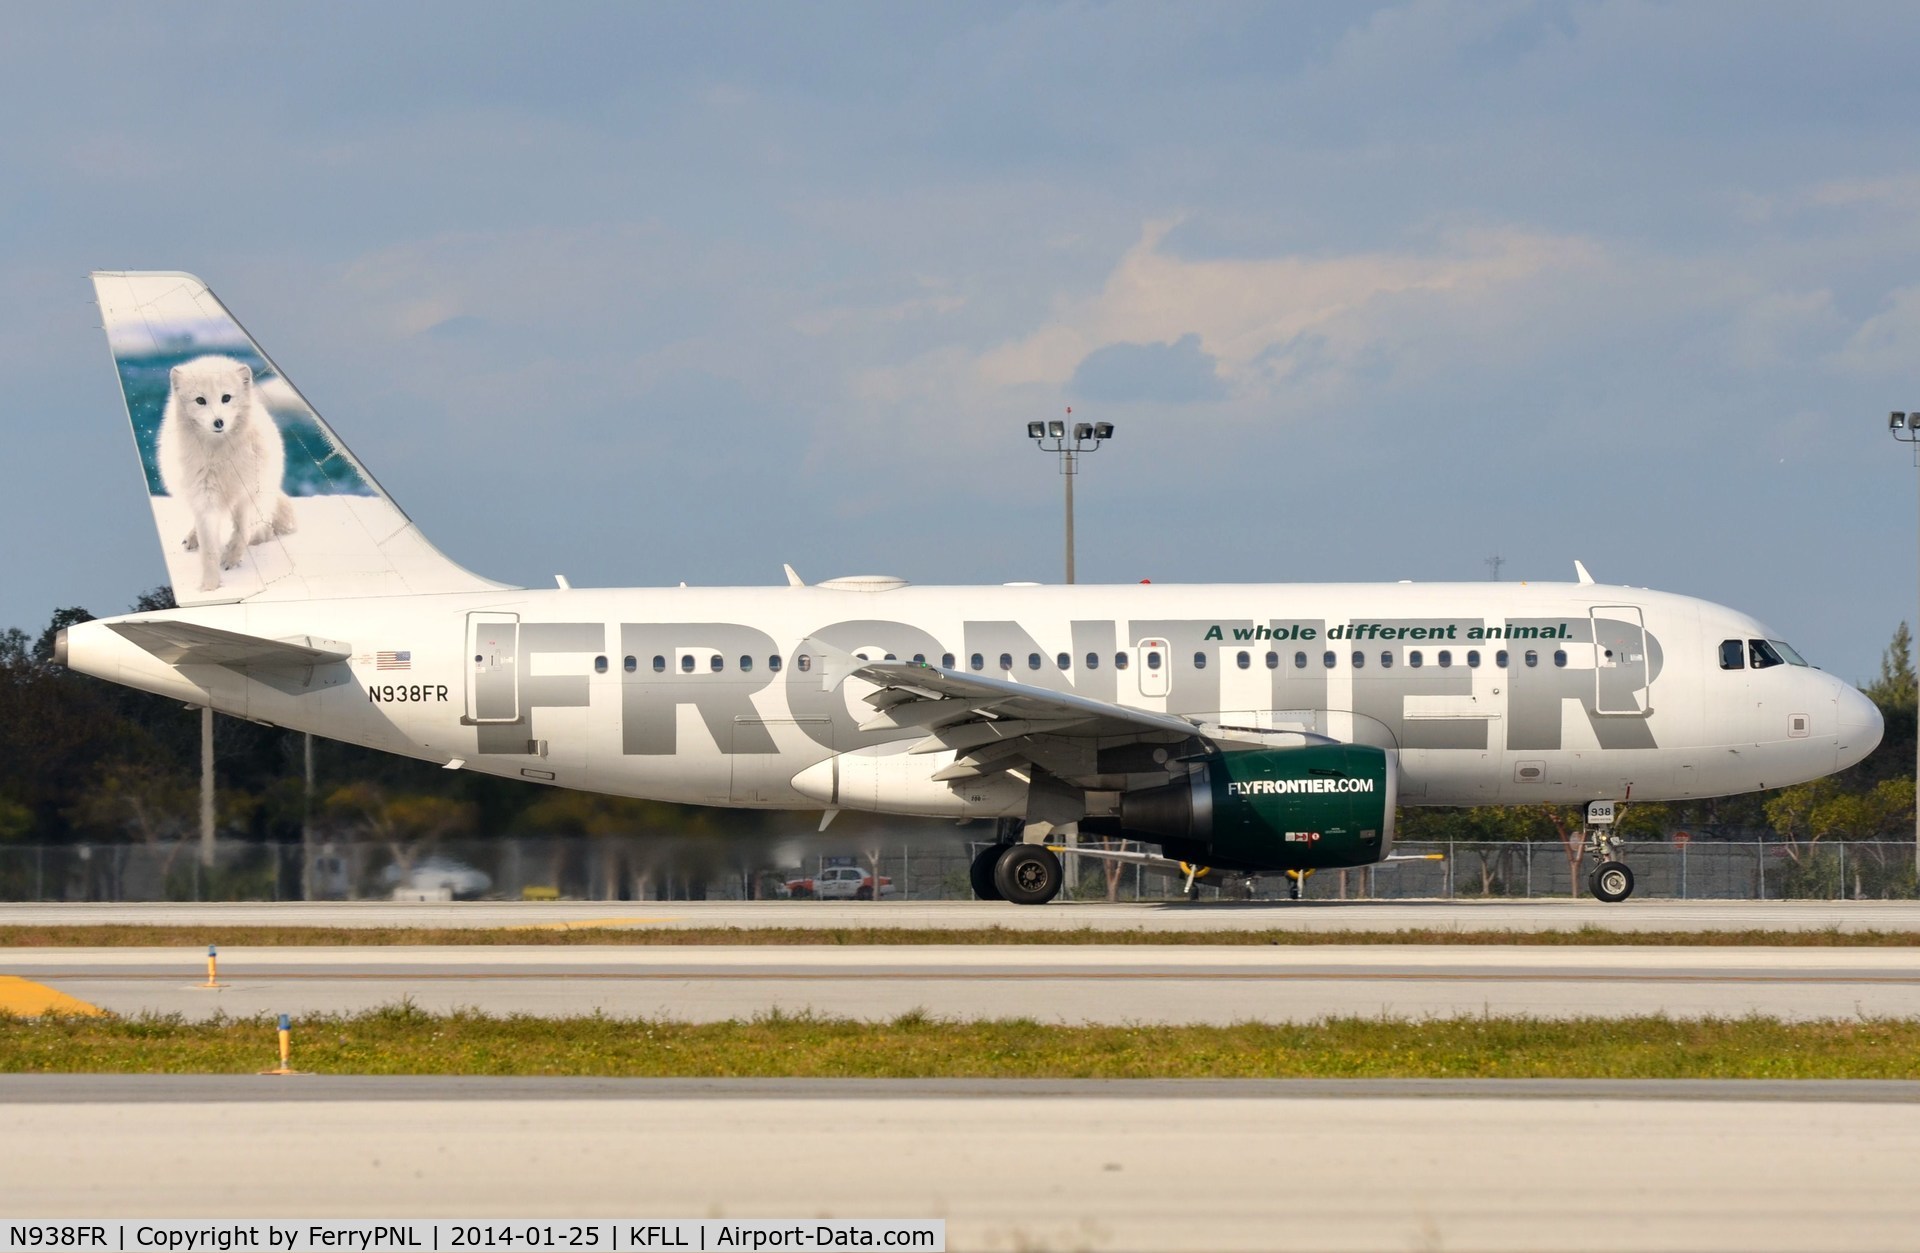 N938FR, 2005 Airbus A319-111 C/N 2406, Frontier A319 taking-off